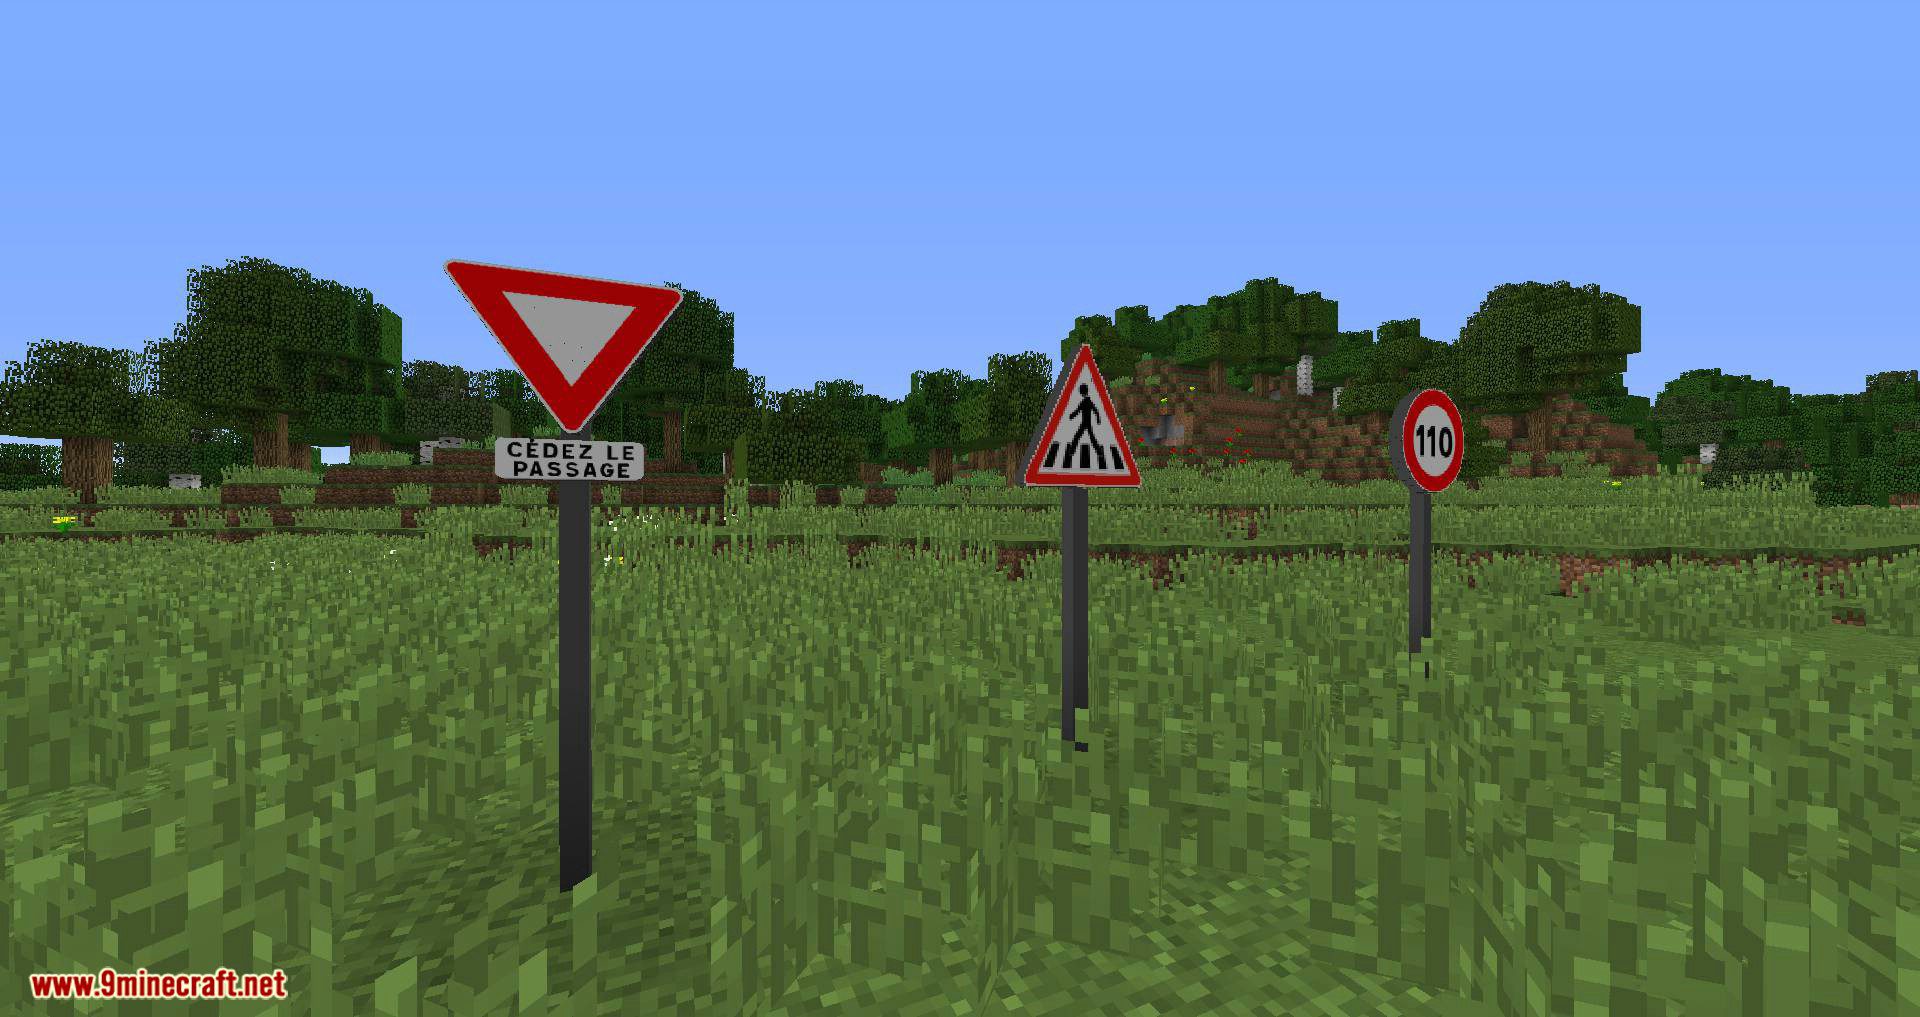 More Road Mod (1.20.4, 1.15.2) - Adds Decoration for the Roads 9